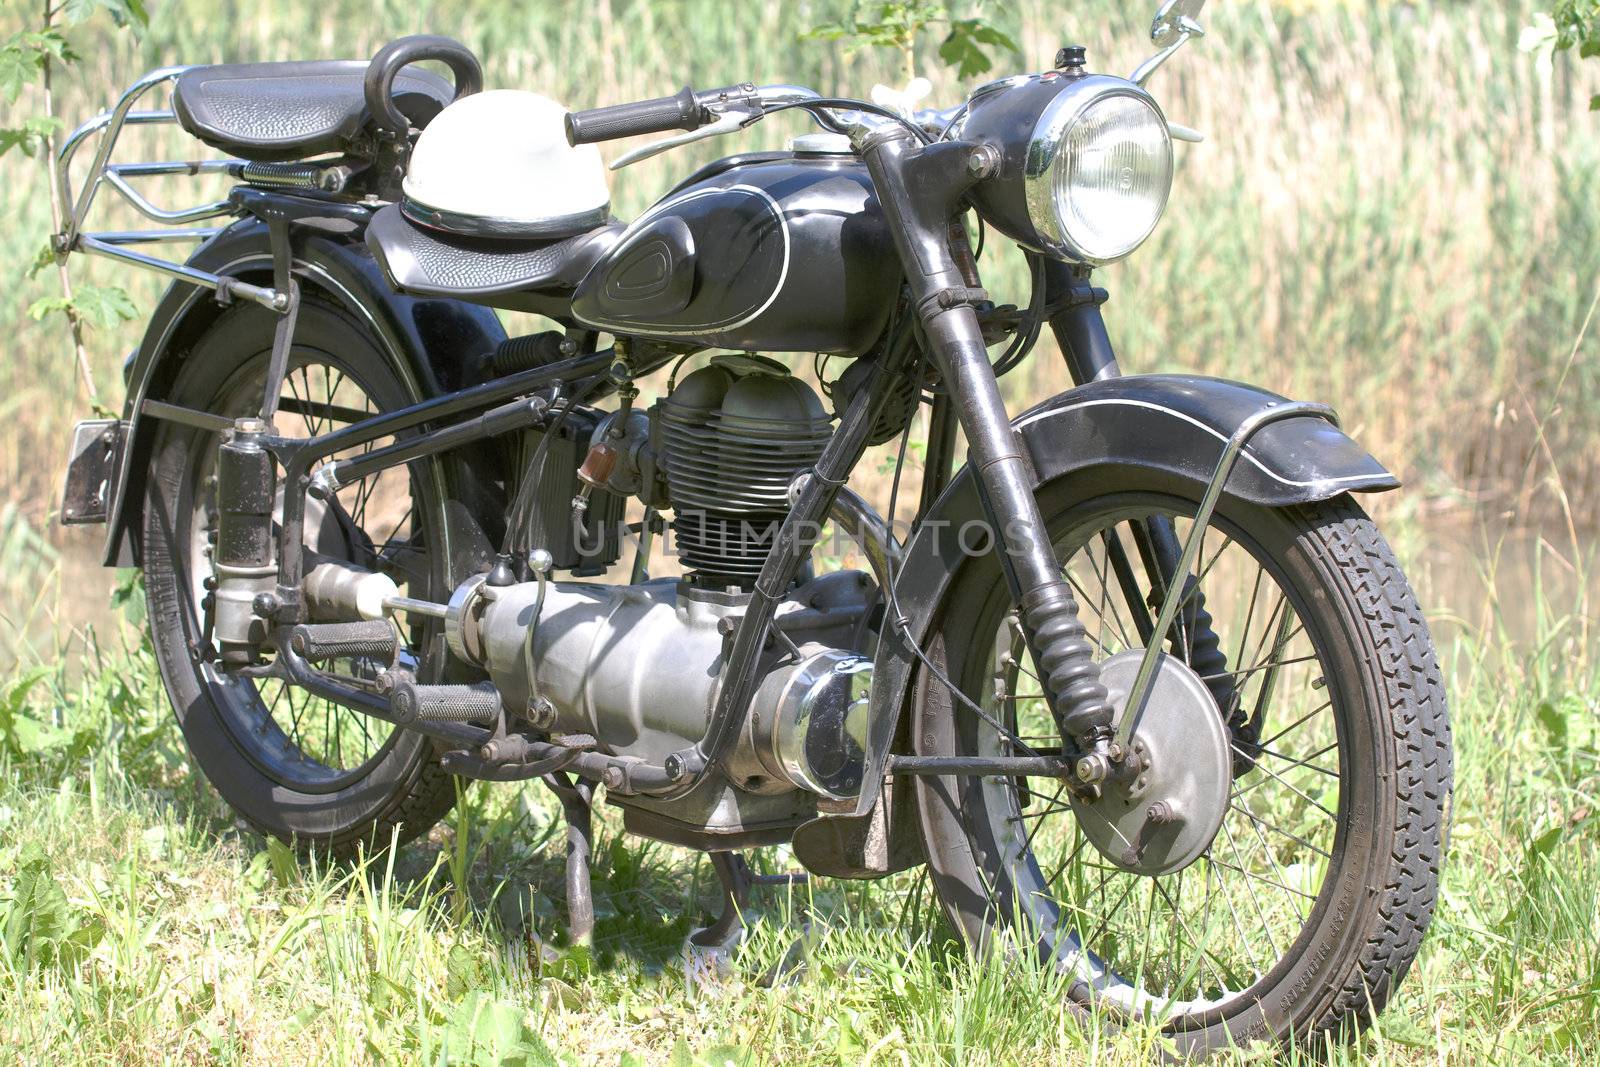 Motorcycle anno 1951 by STphotography